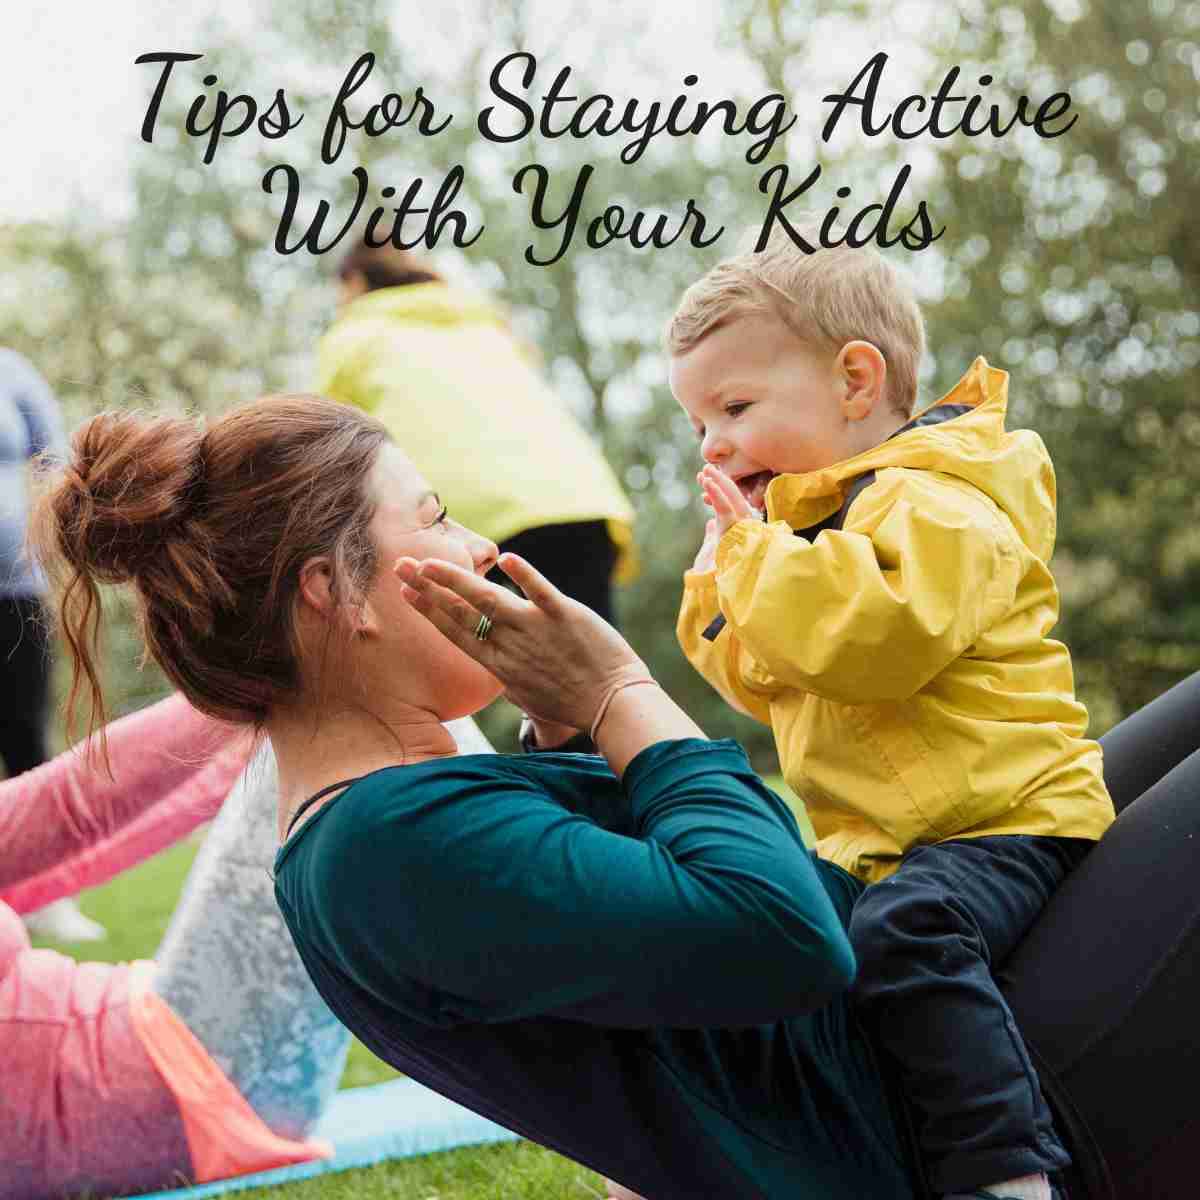 Tips for Staying Active With Your Kids